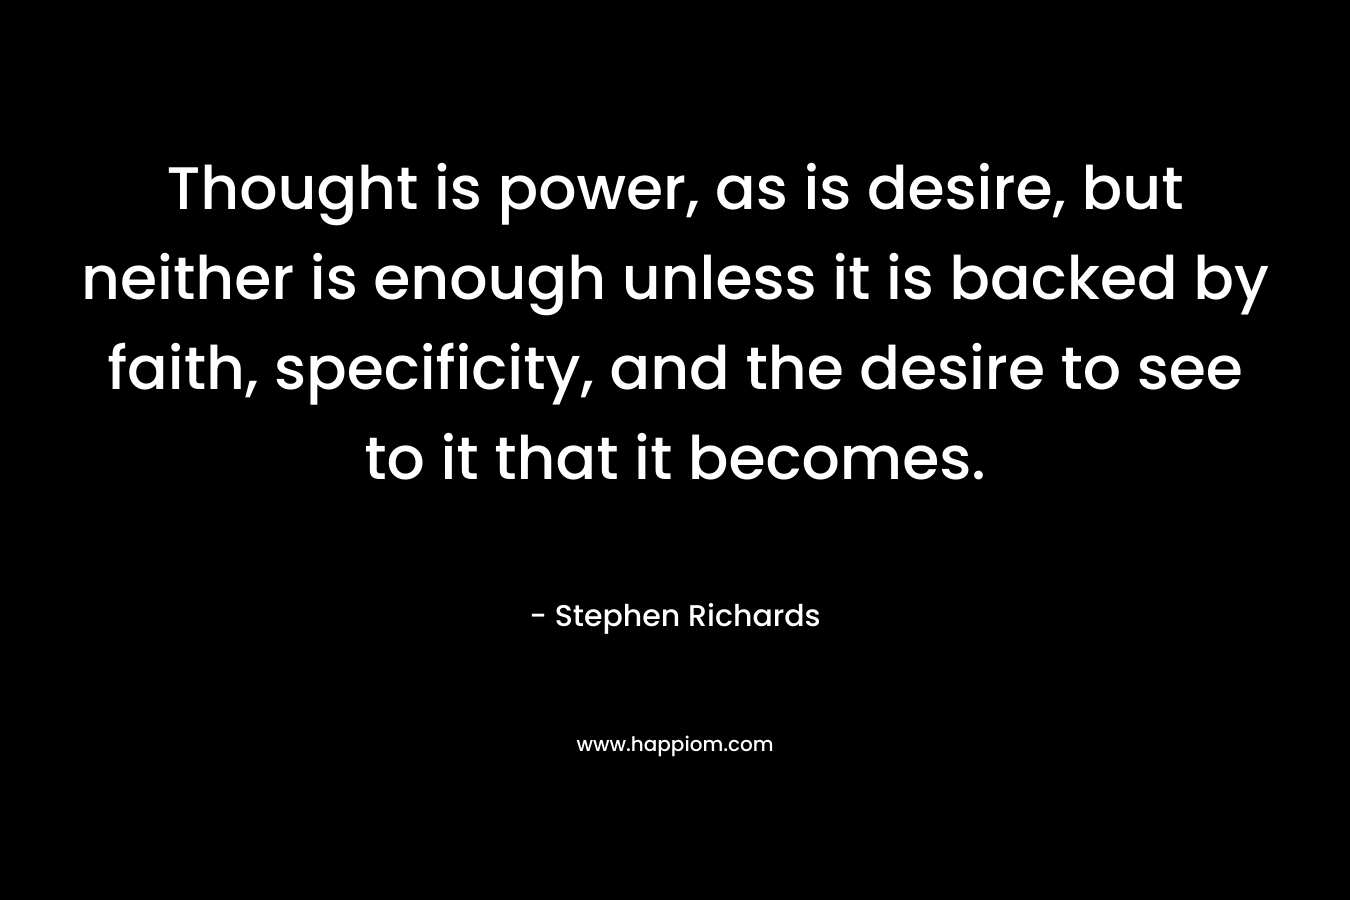 Thought is power, as is desire, but neither is enough unless it is backed by faith, specificity, and the desire to see to it that it becomes.